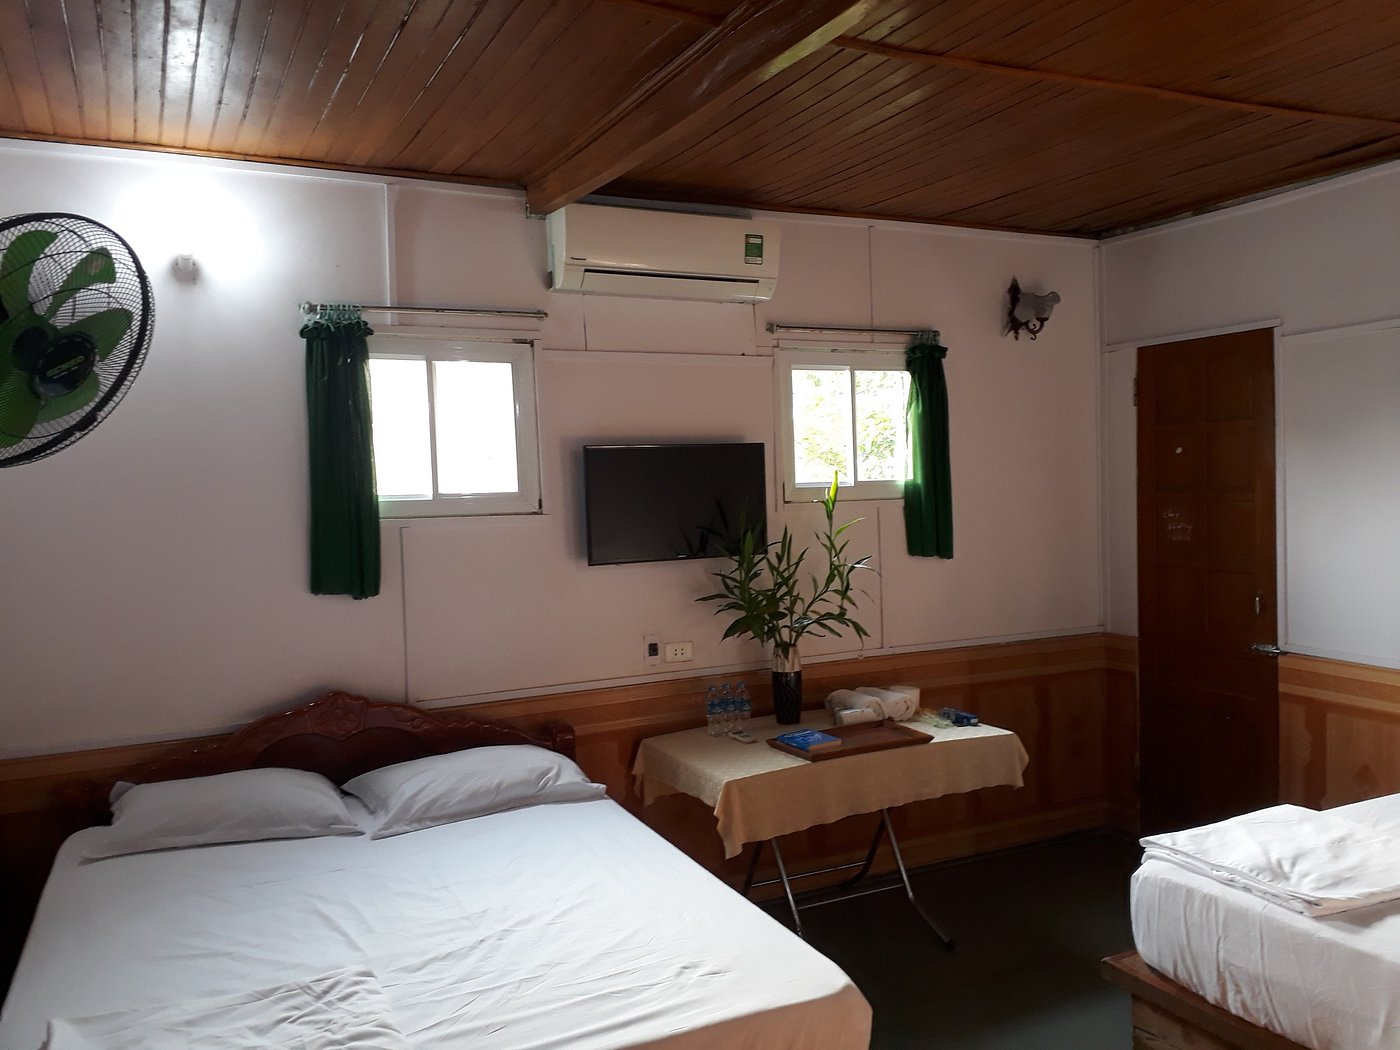 Thanh Chuong Dong Loan Guesthouse